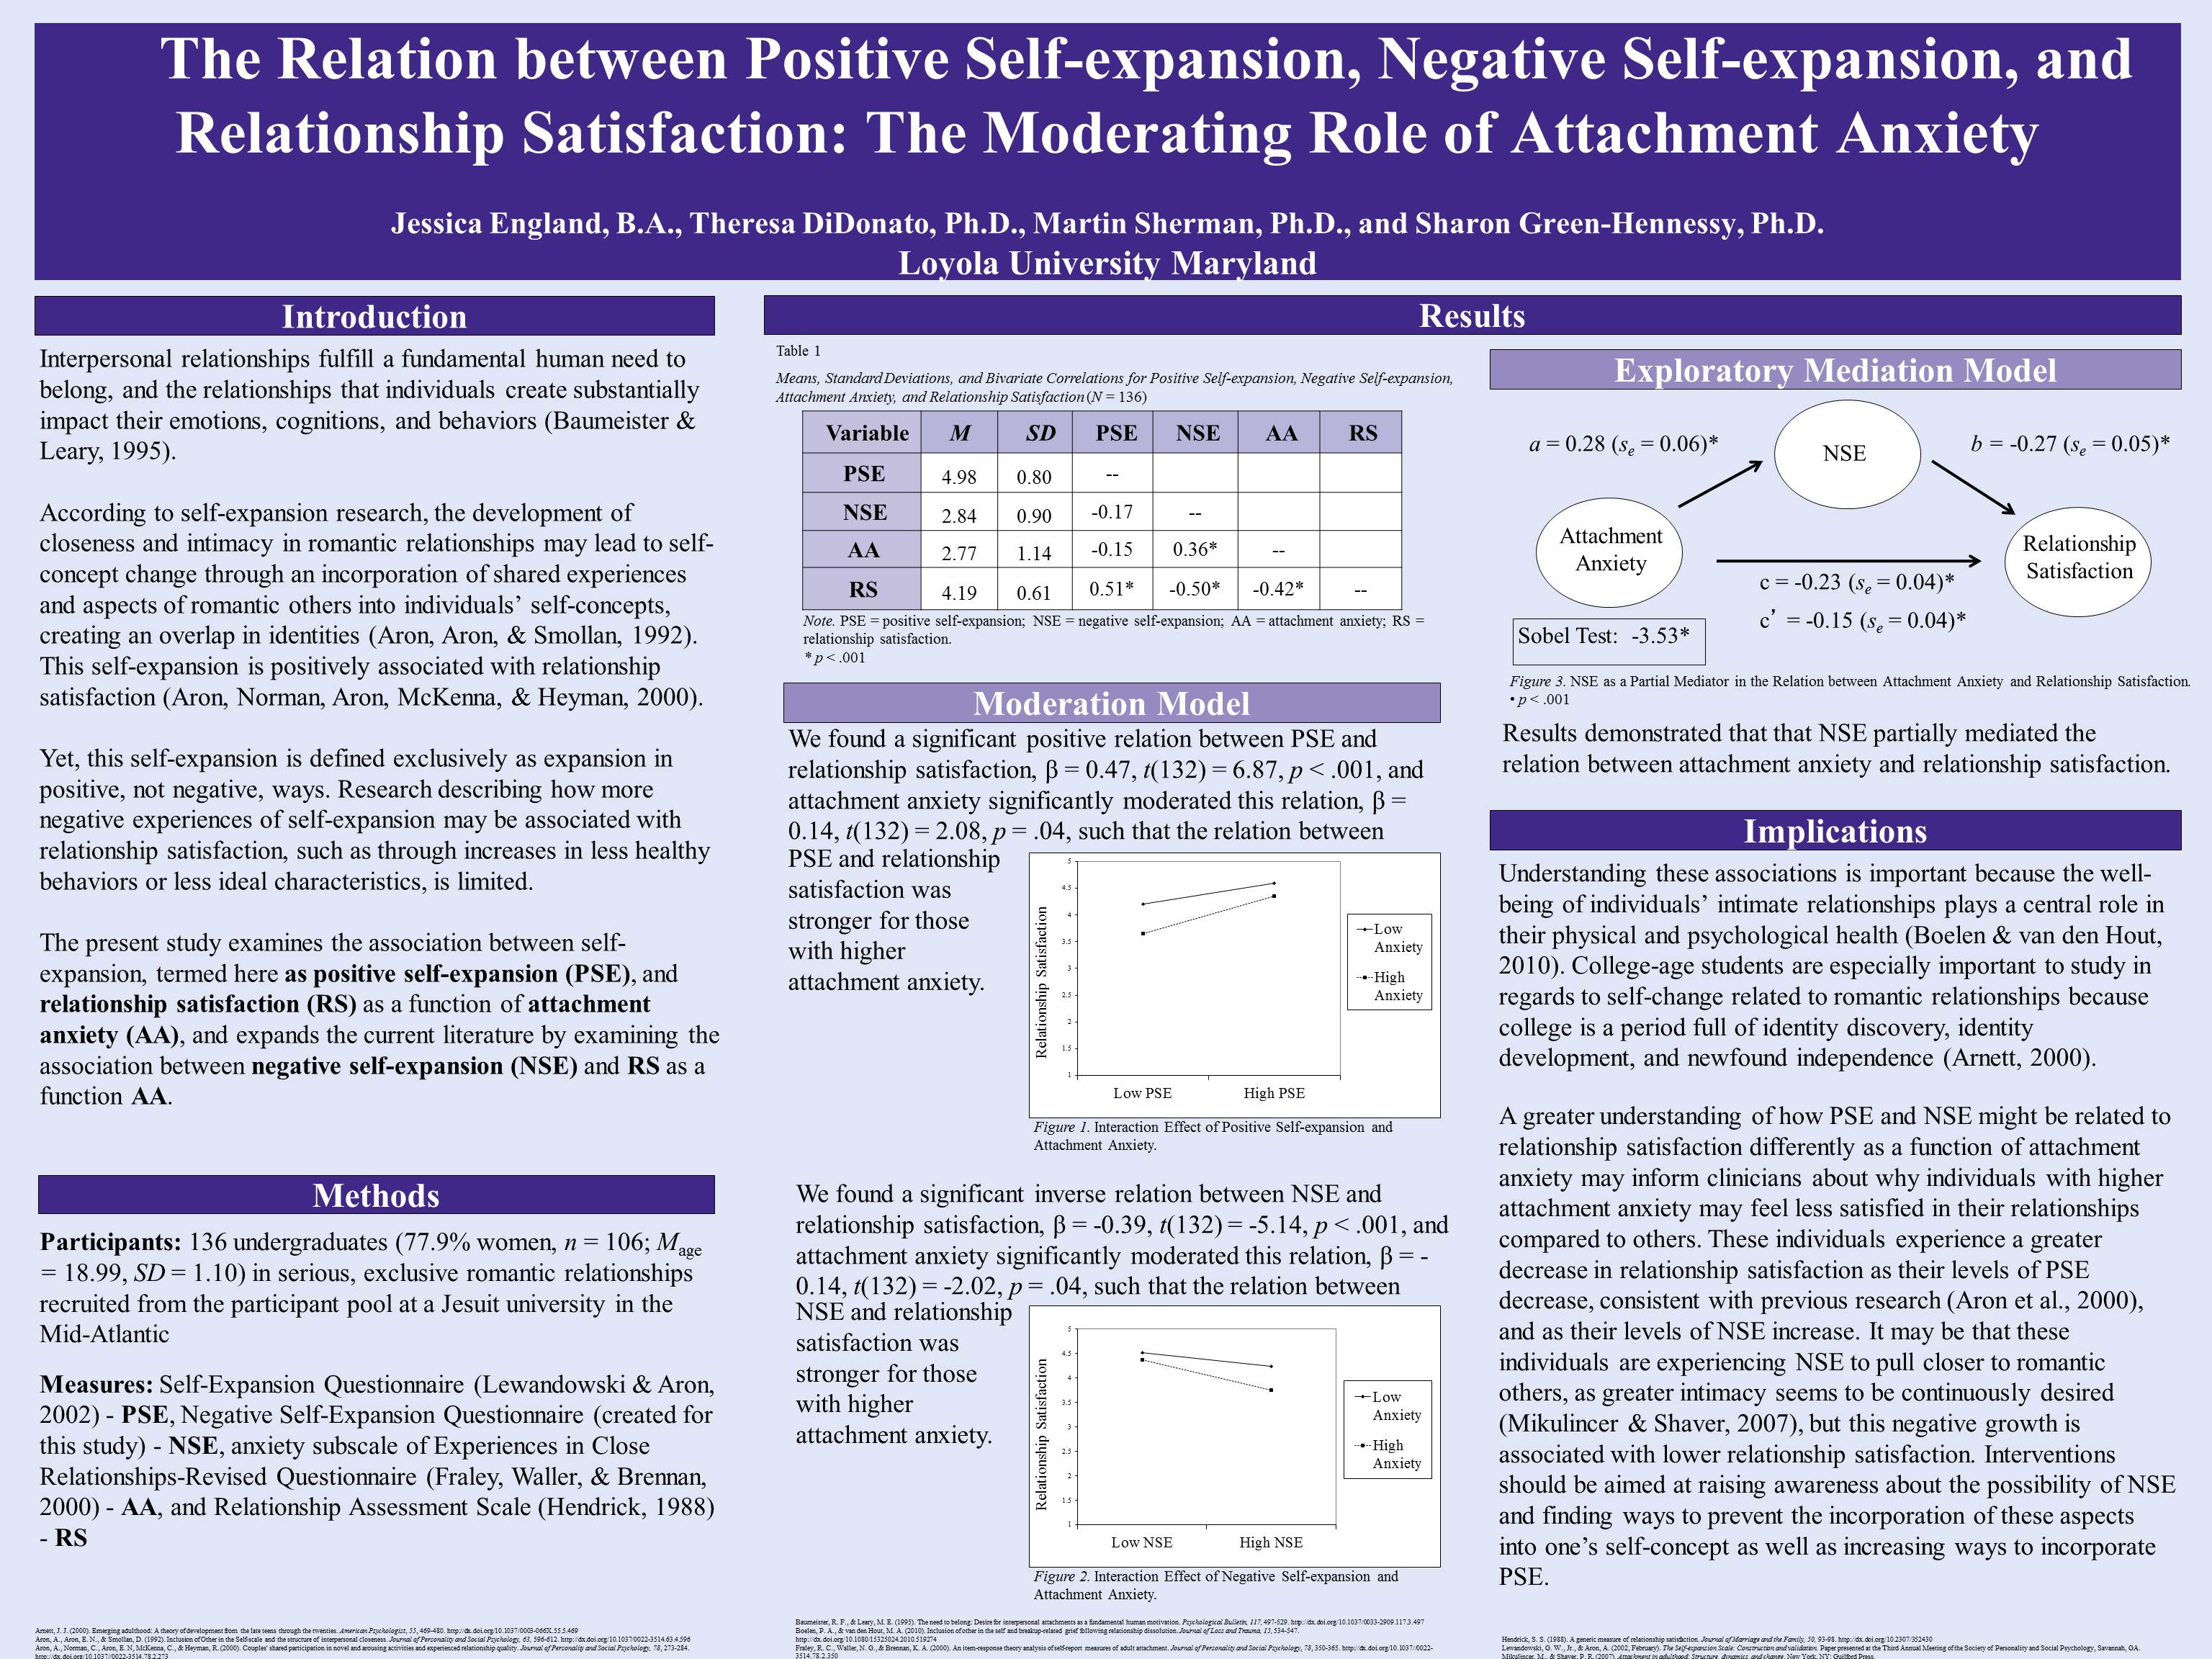 poster image: 'The Relation between Positive Self-Expansion, Negative Self-Expansion, and Relationship Satisfaction: The Moderating Role of Attachment Anxiety'